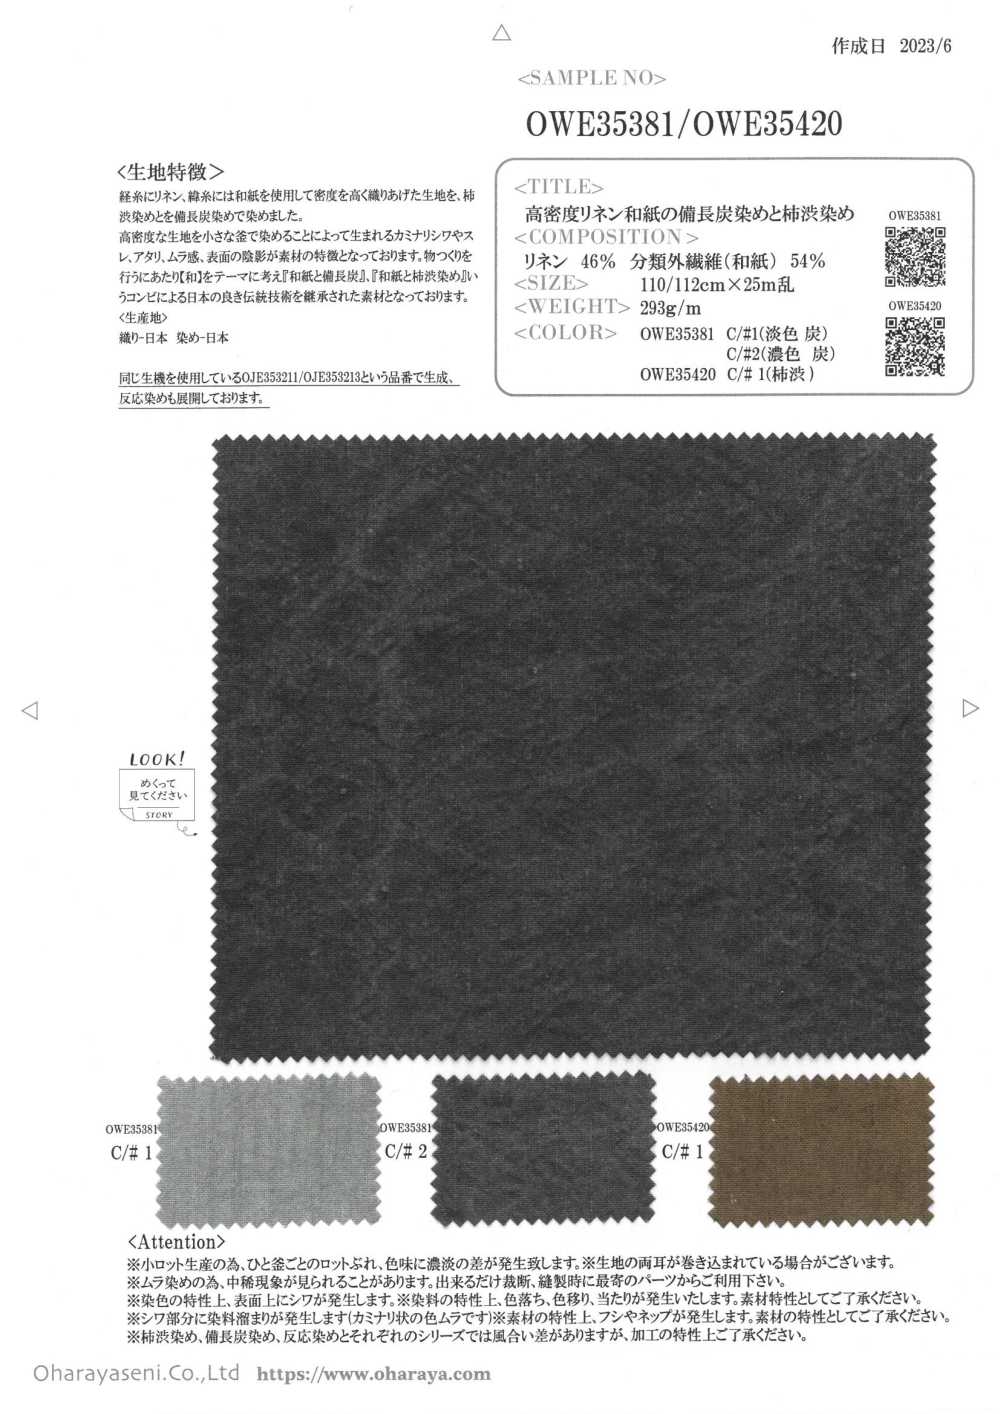 OWE35420 High Density Linen Washi Dyed With Persimmon Tannin[Textile / Fabric] Oharayaseni